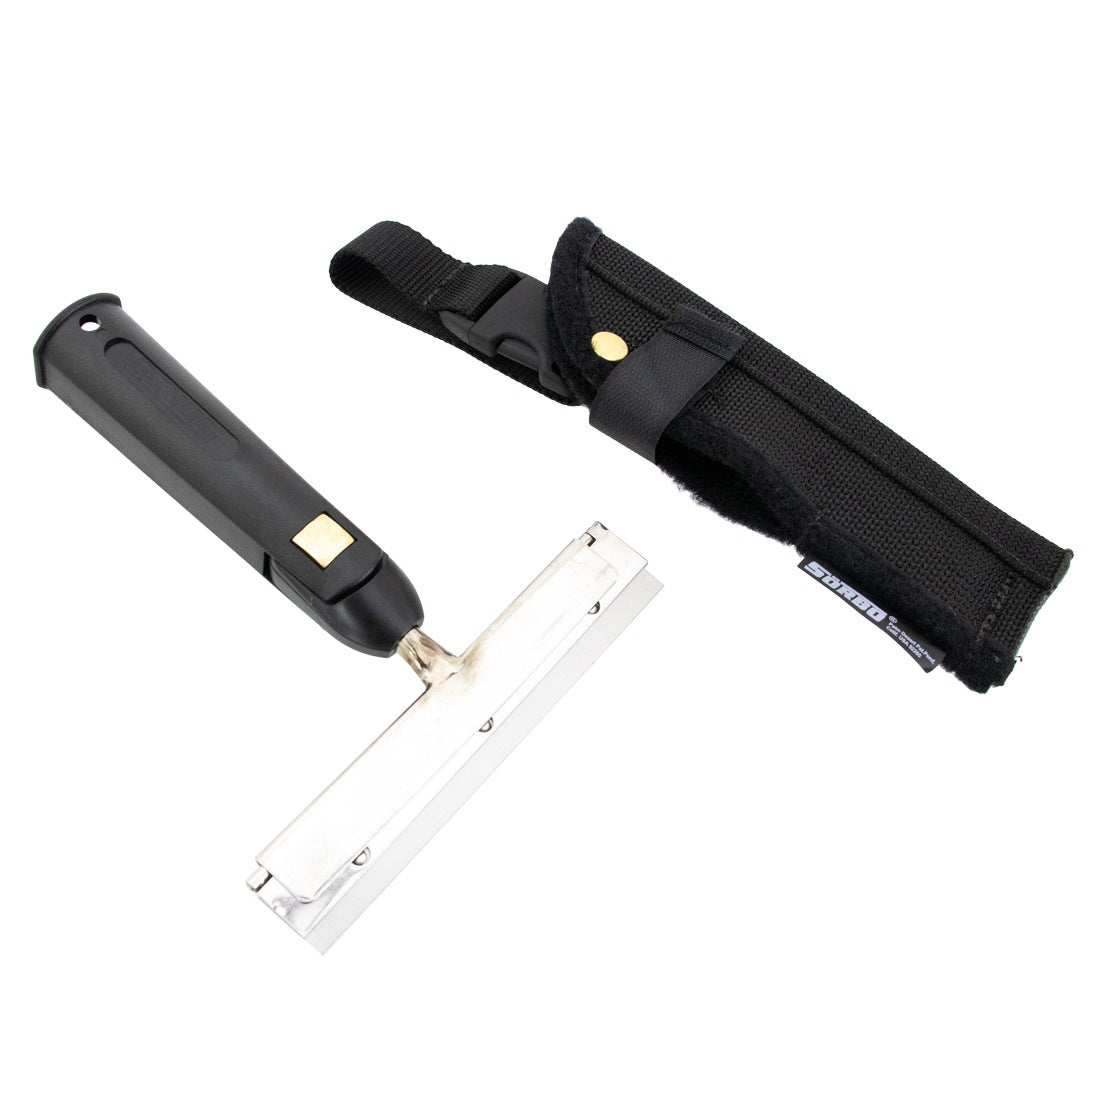 Sörbo Horizontal Swivel Scraper with Holster - 6 Inch - Scraper and Holster Side-by-Side View